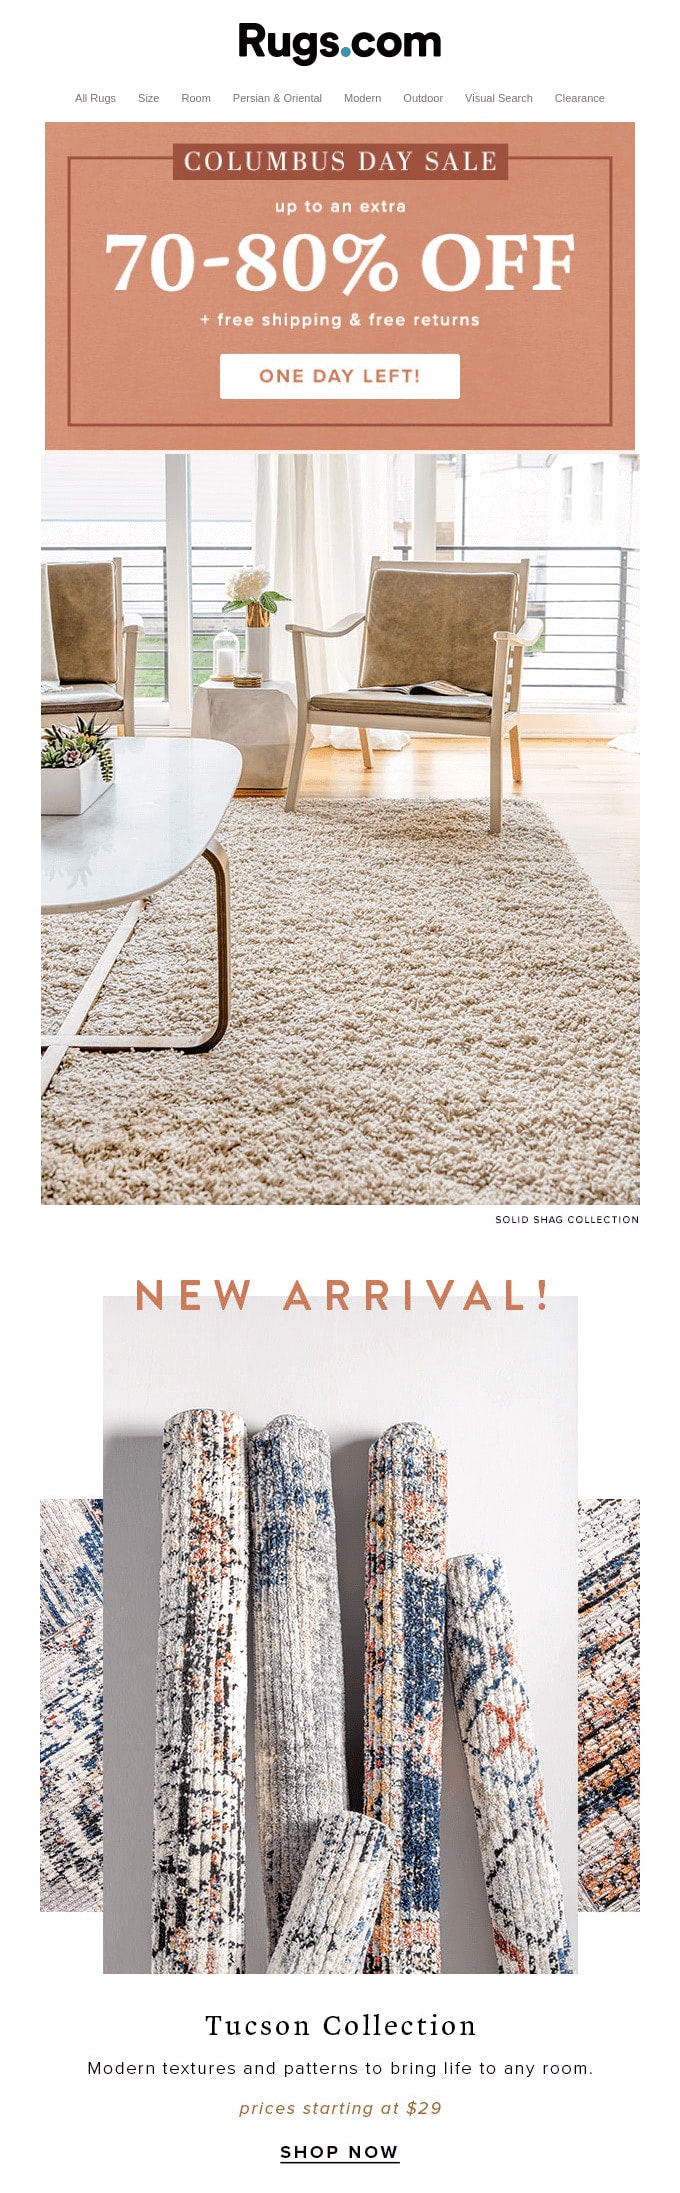 Email Design from Rugs